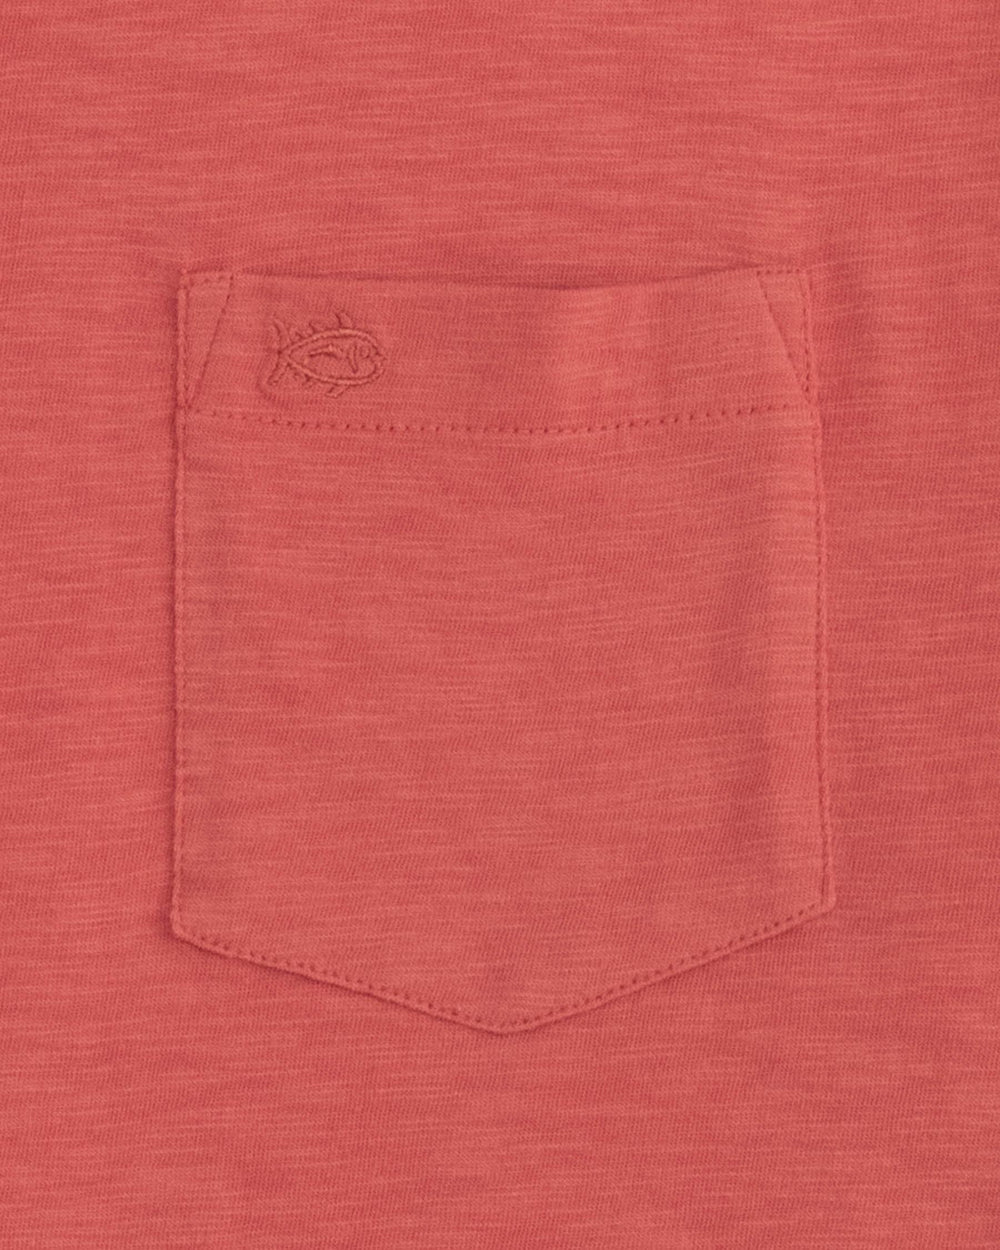 The pocket view of the Sun Farer T-Shirt by Southern Tide - Mineral Red